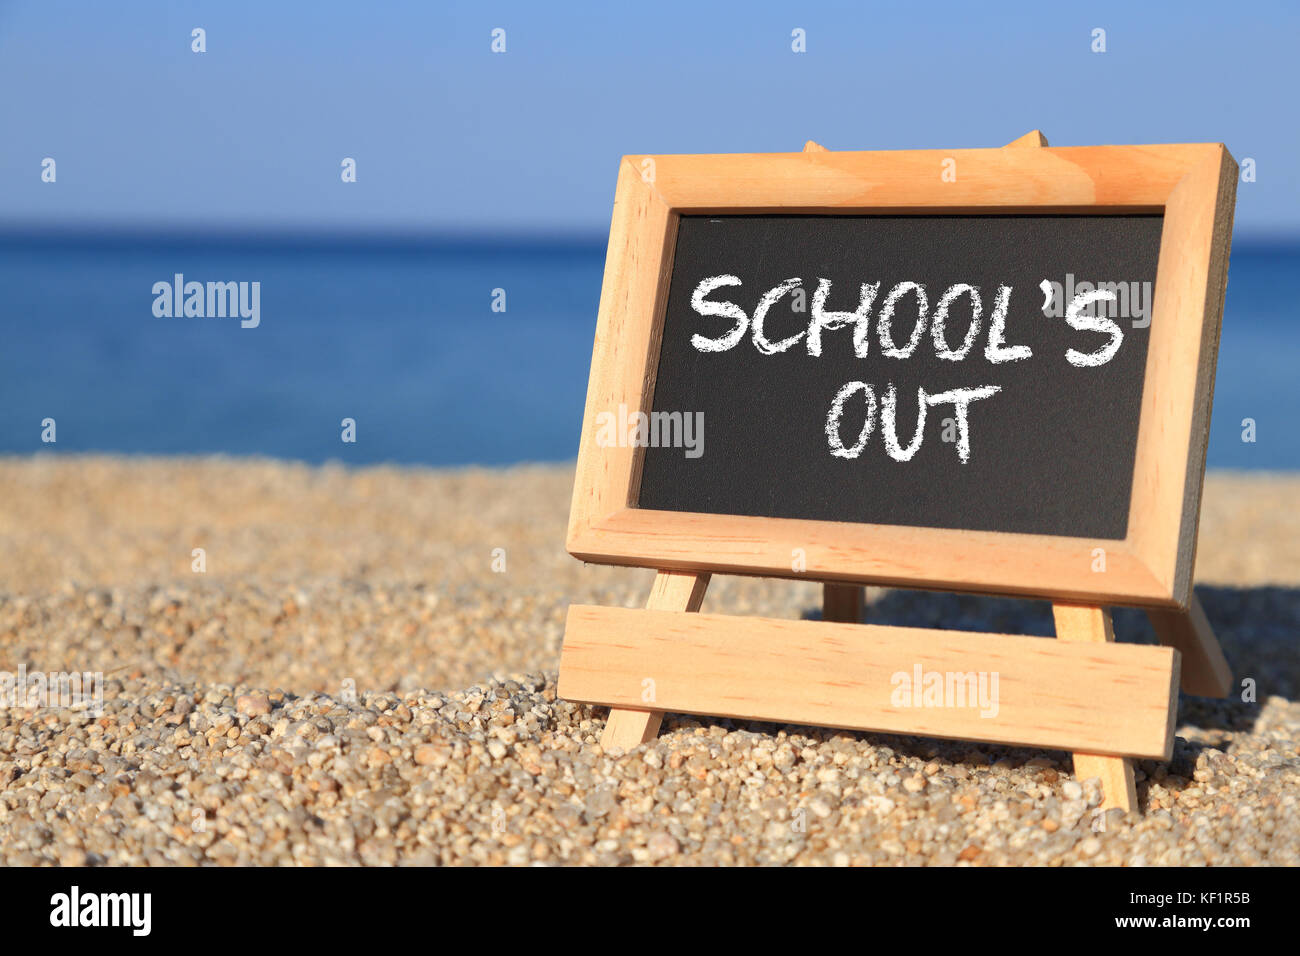 Blackboard with School's out text on the beach Stock Photo